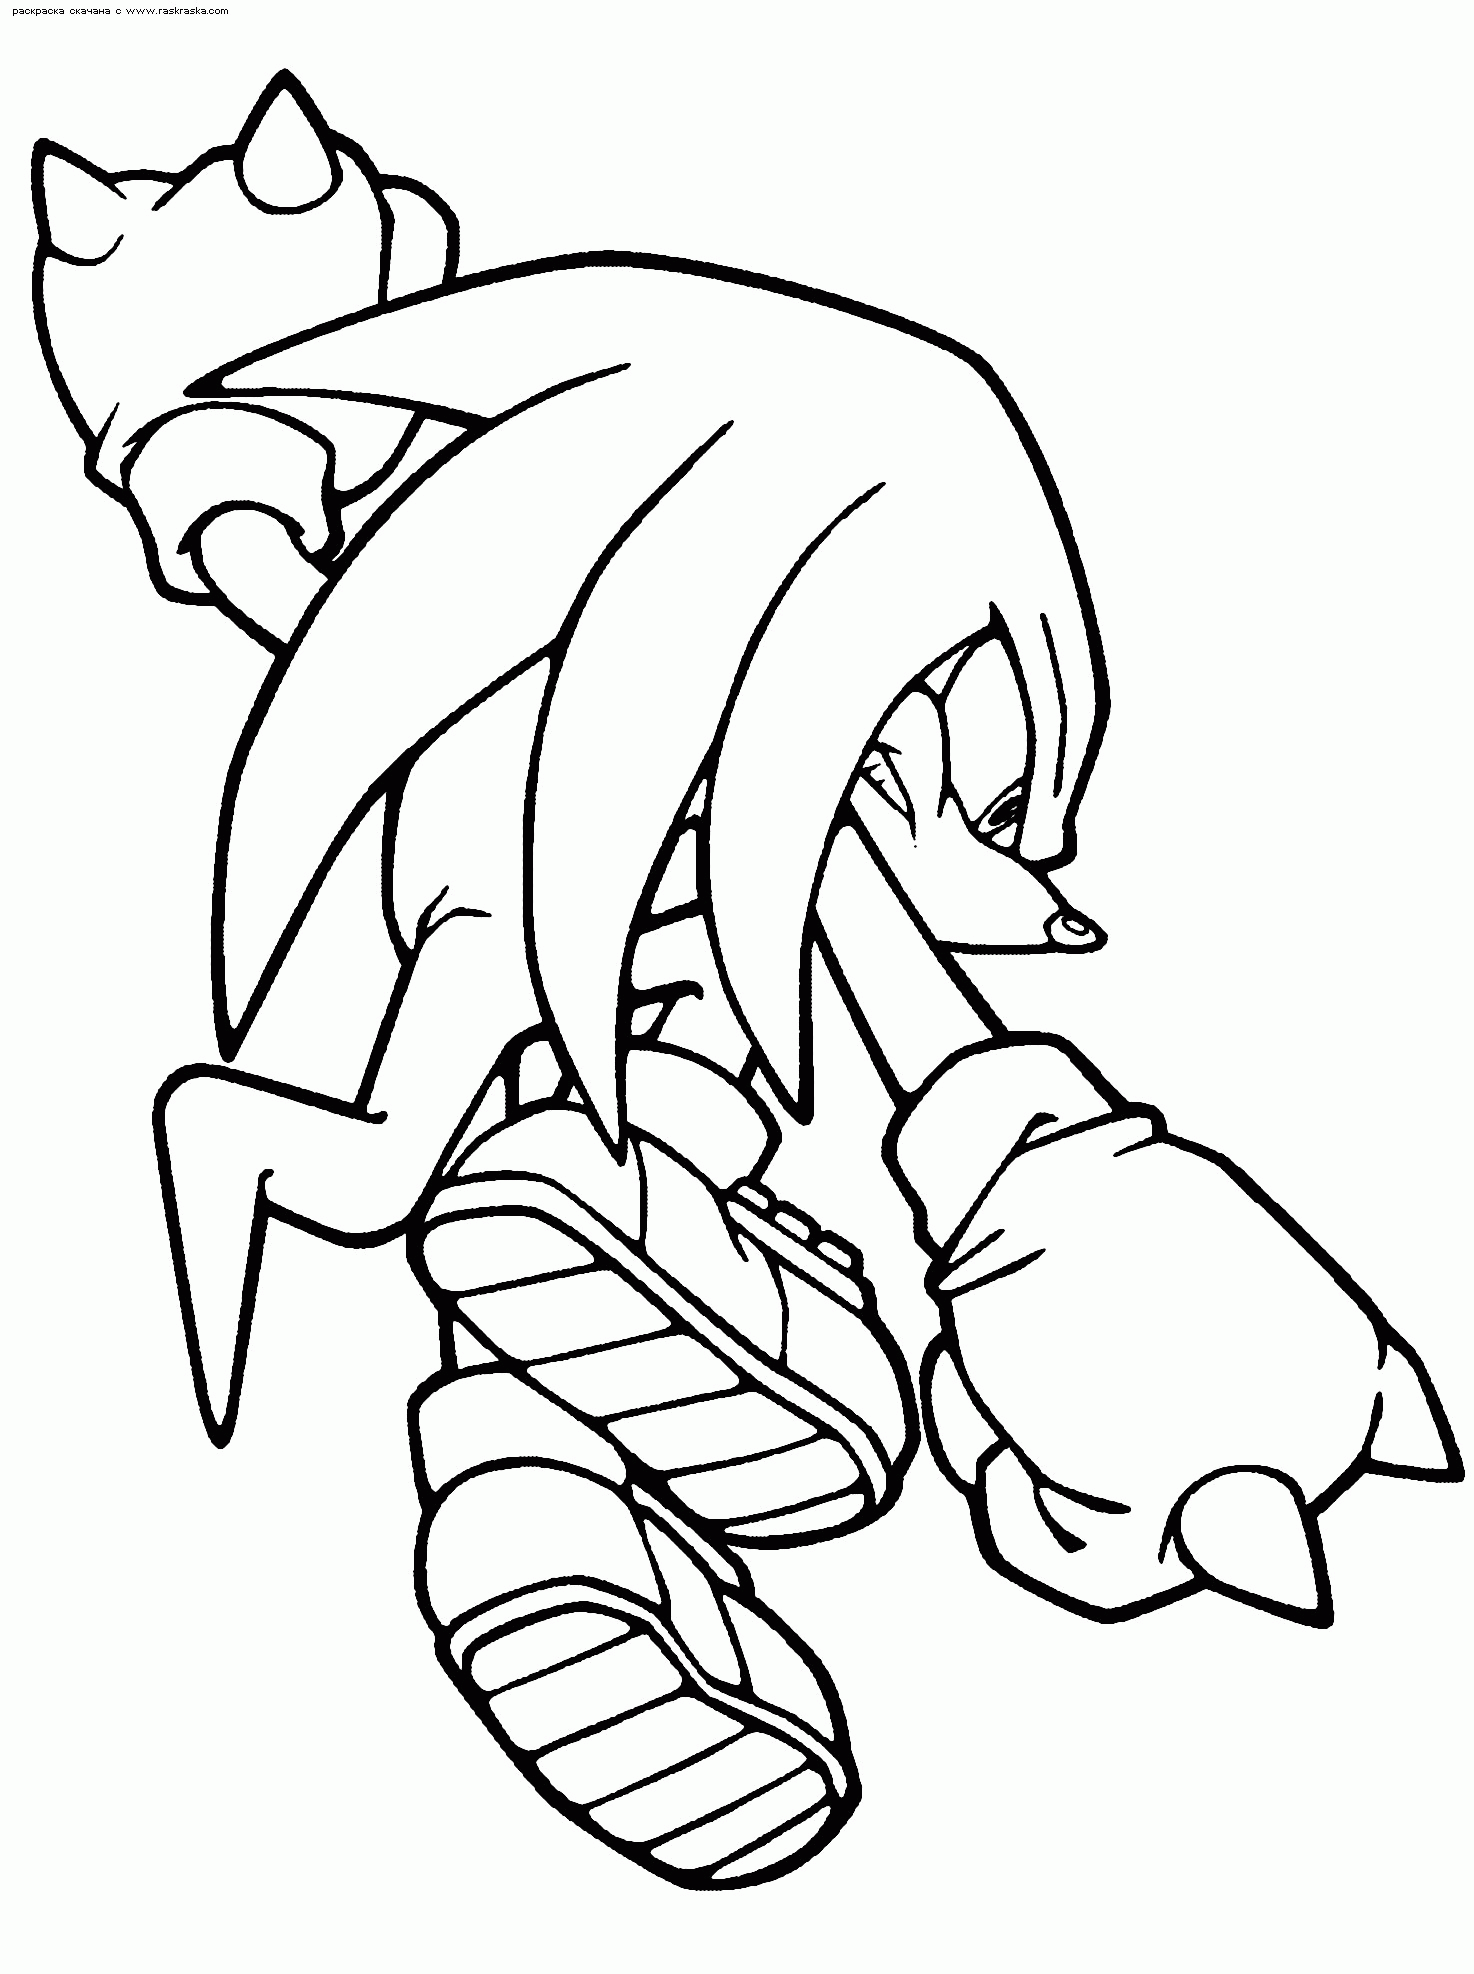 Free Sonic Coloring Pages Knuckles, Download Free Sonic Coloring Pages